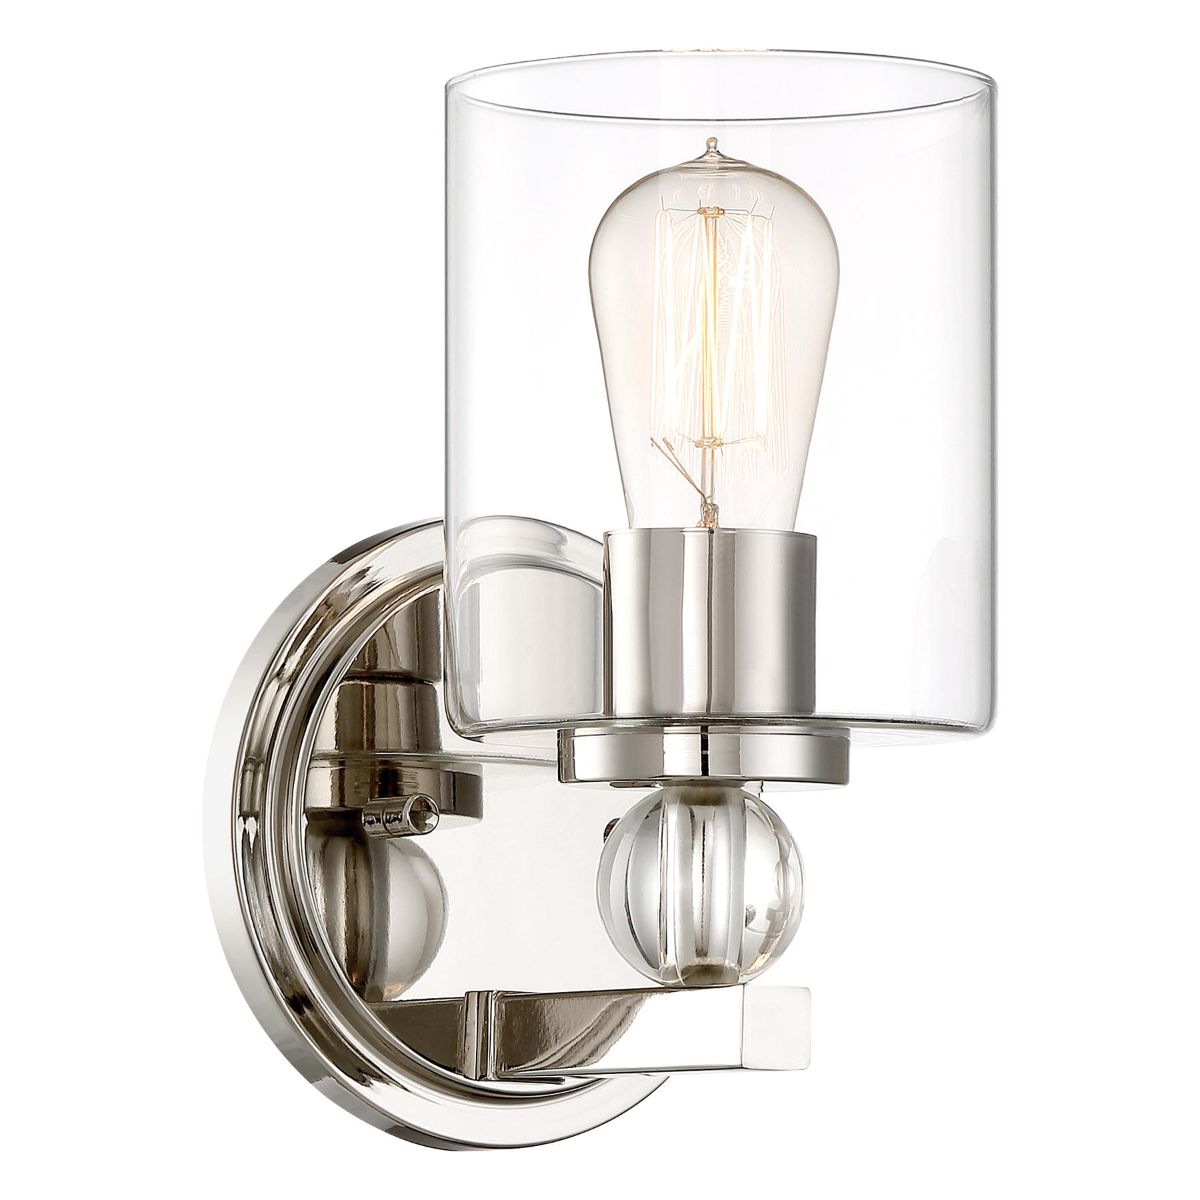 Studio 5 10 in. Wall Sconce